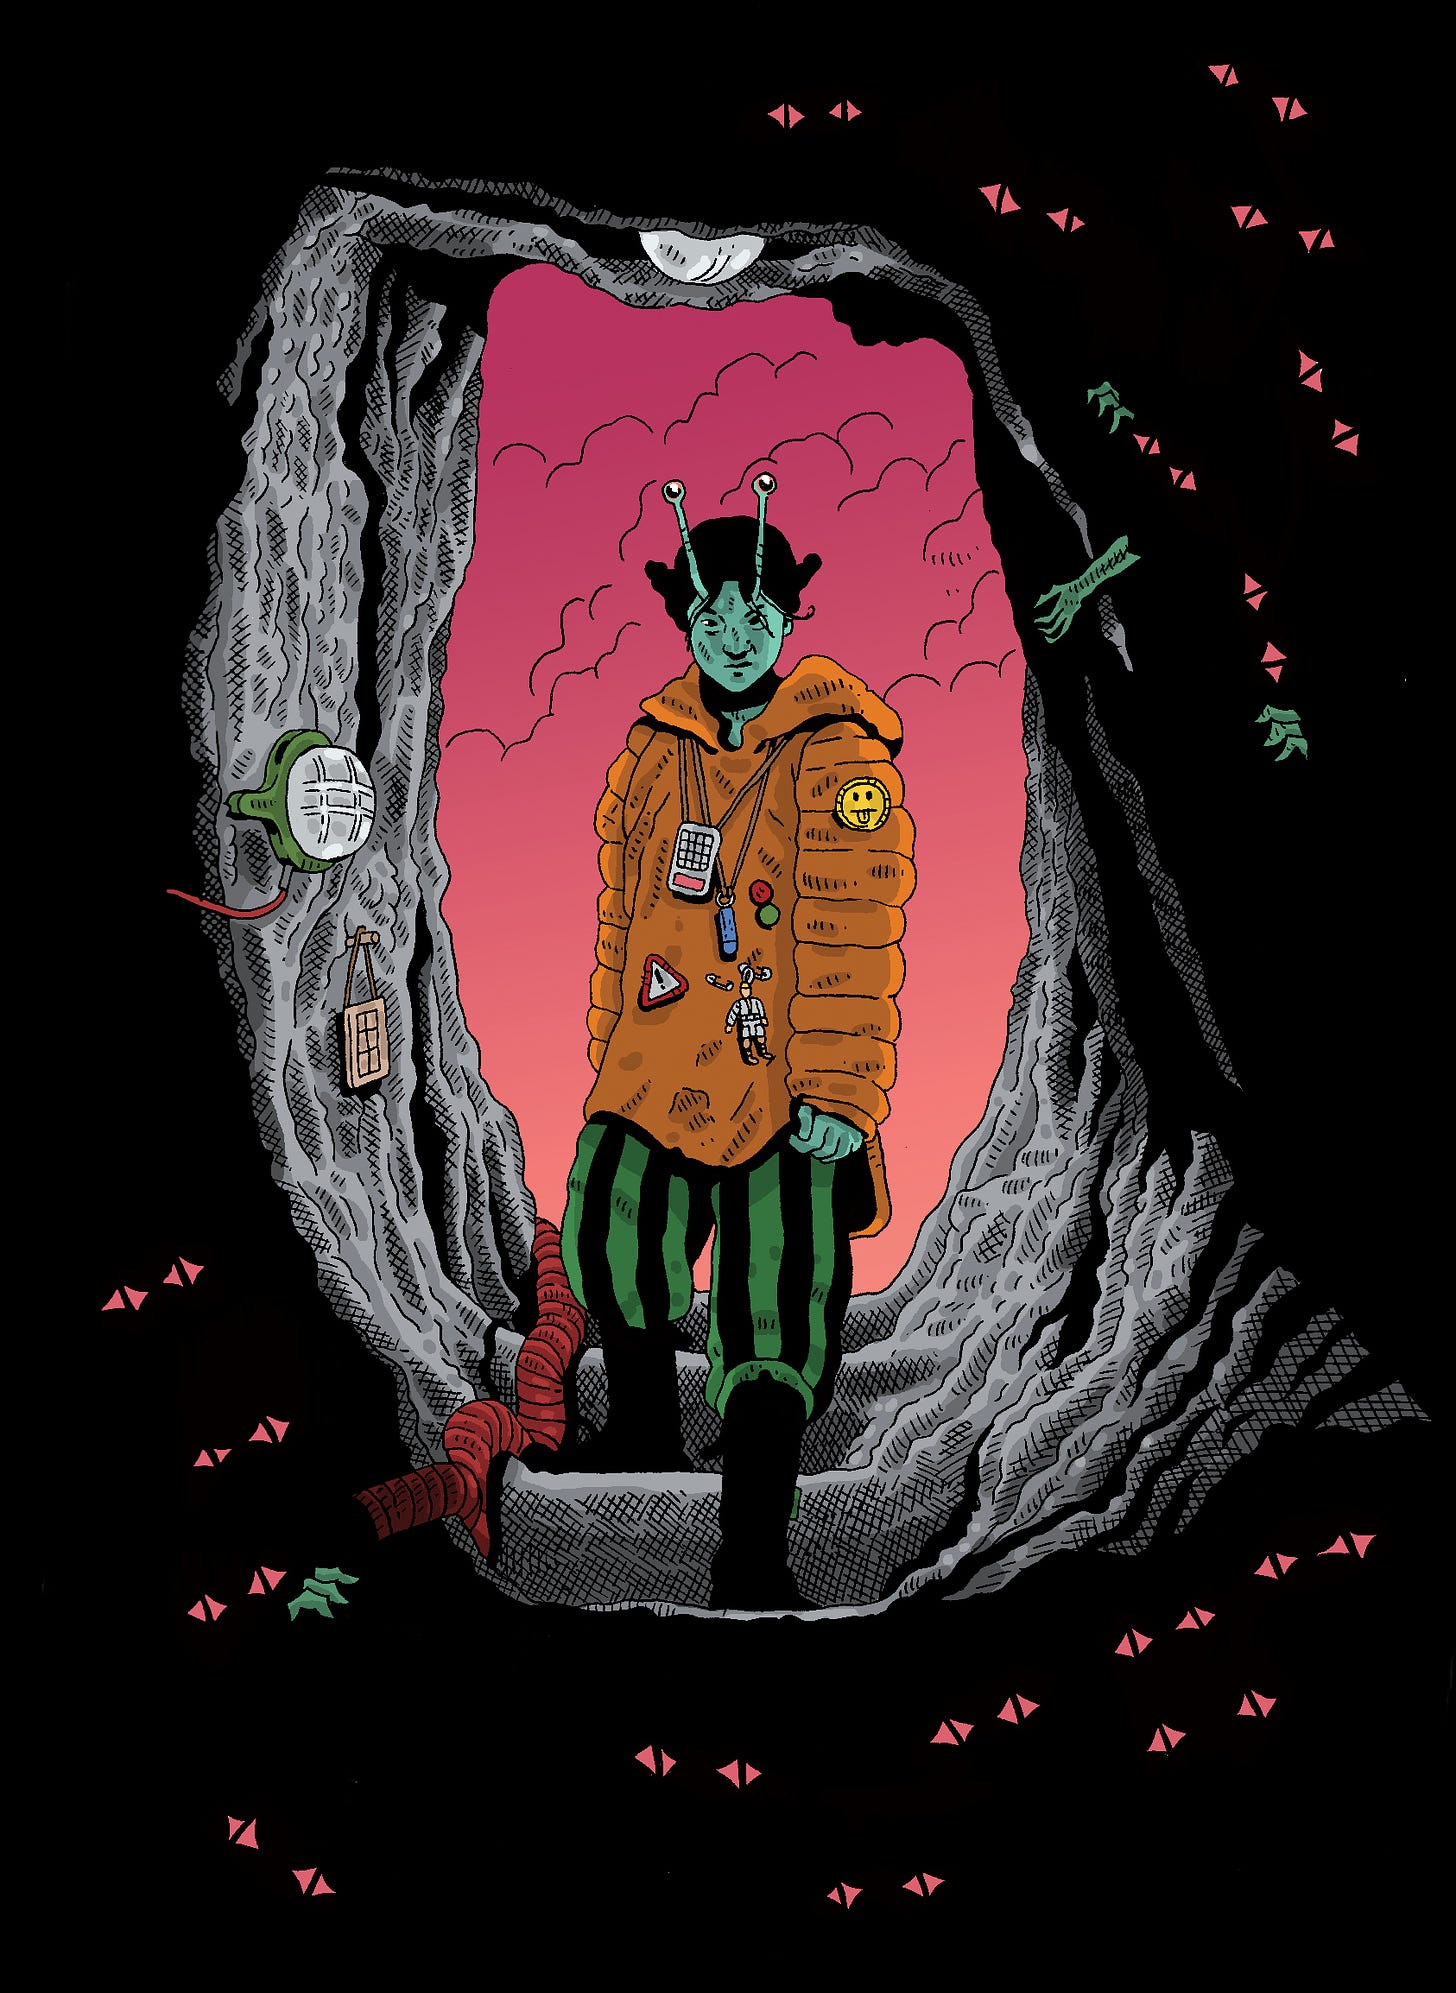 A young person stands looking at the viewer, at the mouth of a dark cave, surrounded by the eyes of unseen creatures. The person is wearing an orange puffer jacket adorned with a tongue-hanging-out emoji badge, with a calculator and USB stick hung on string necklaces. A small figurine, possibly of Luke Skywalker, is pinned to the jacket. The person has two eyes on stalks above his head.